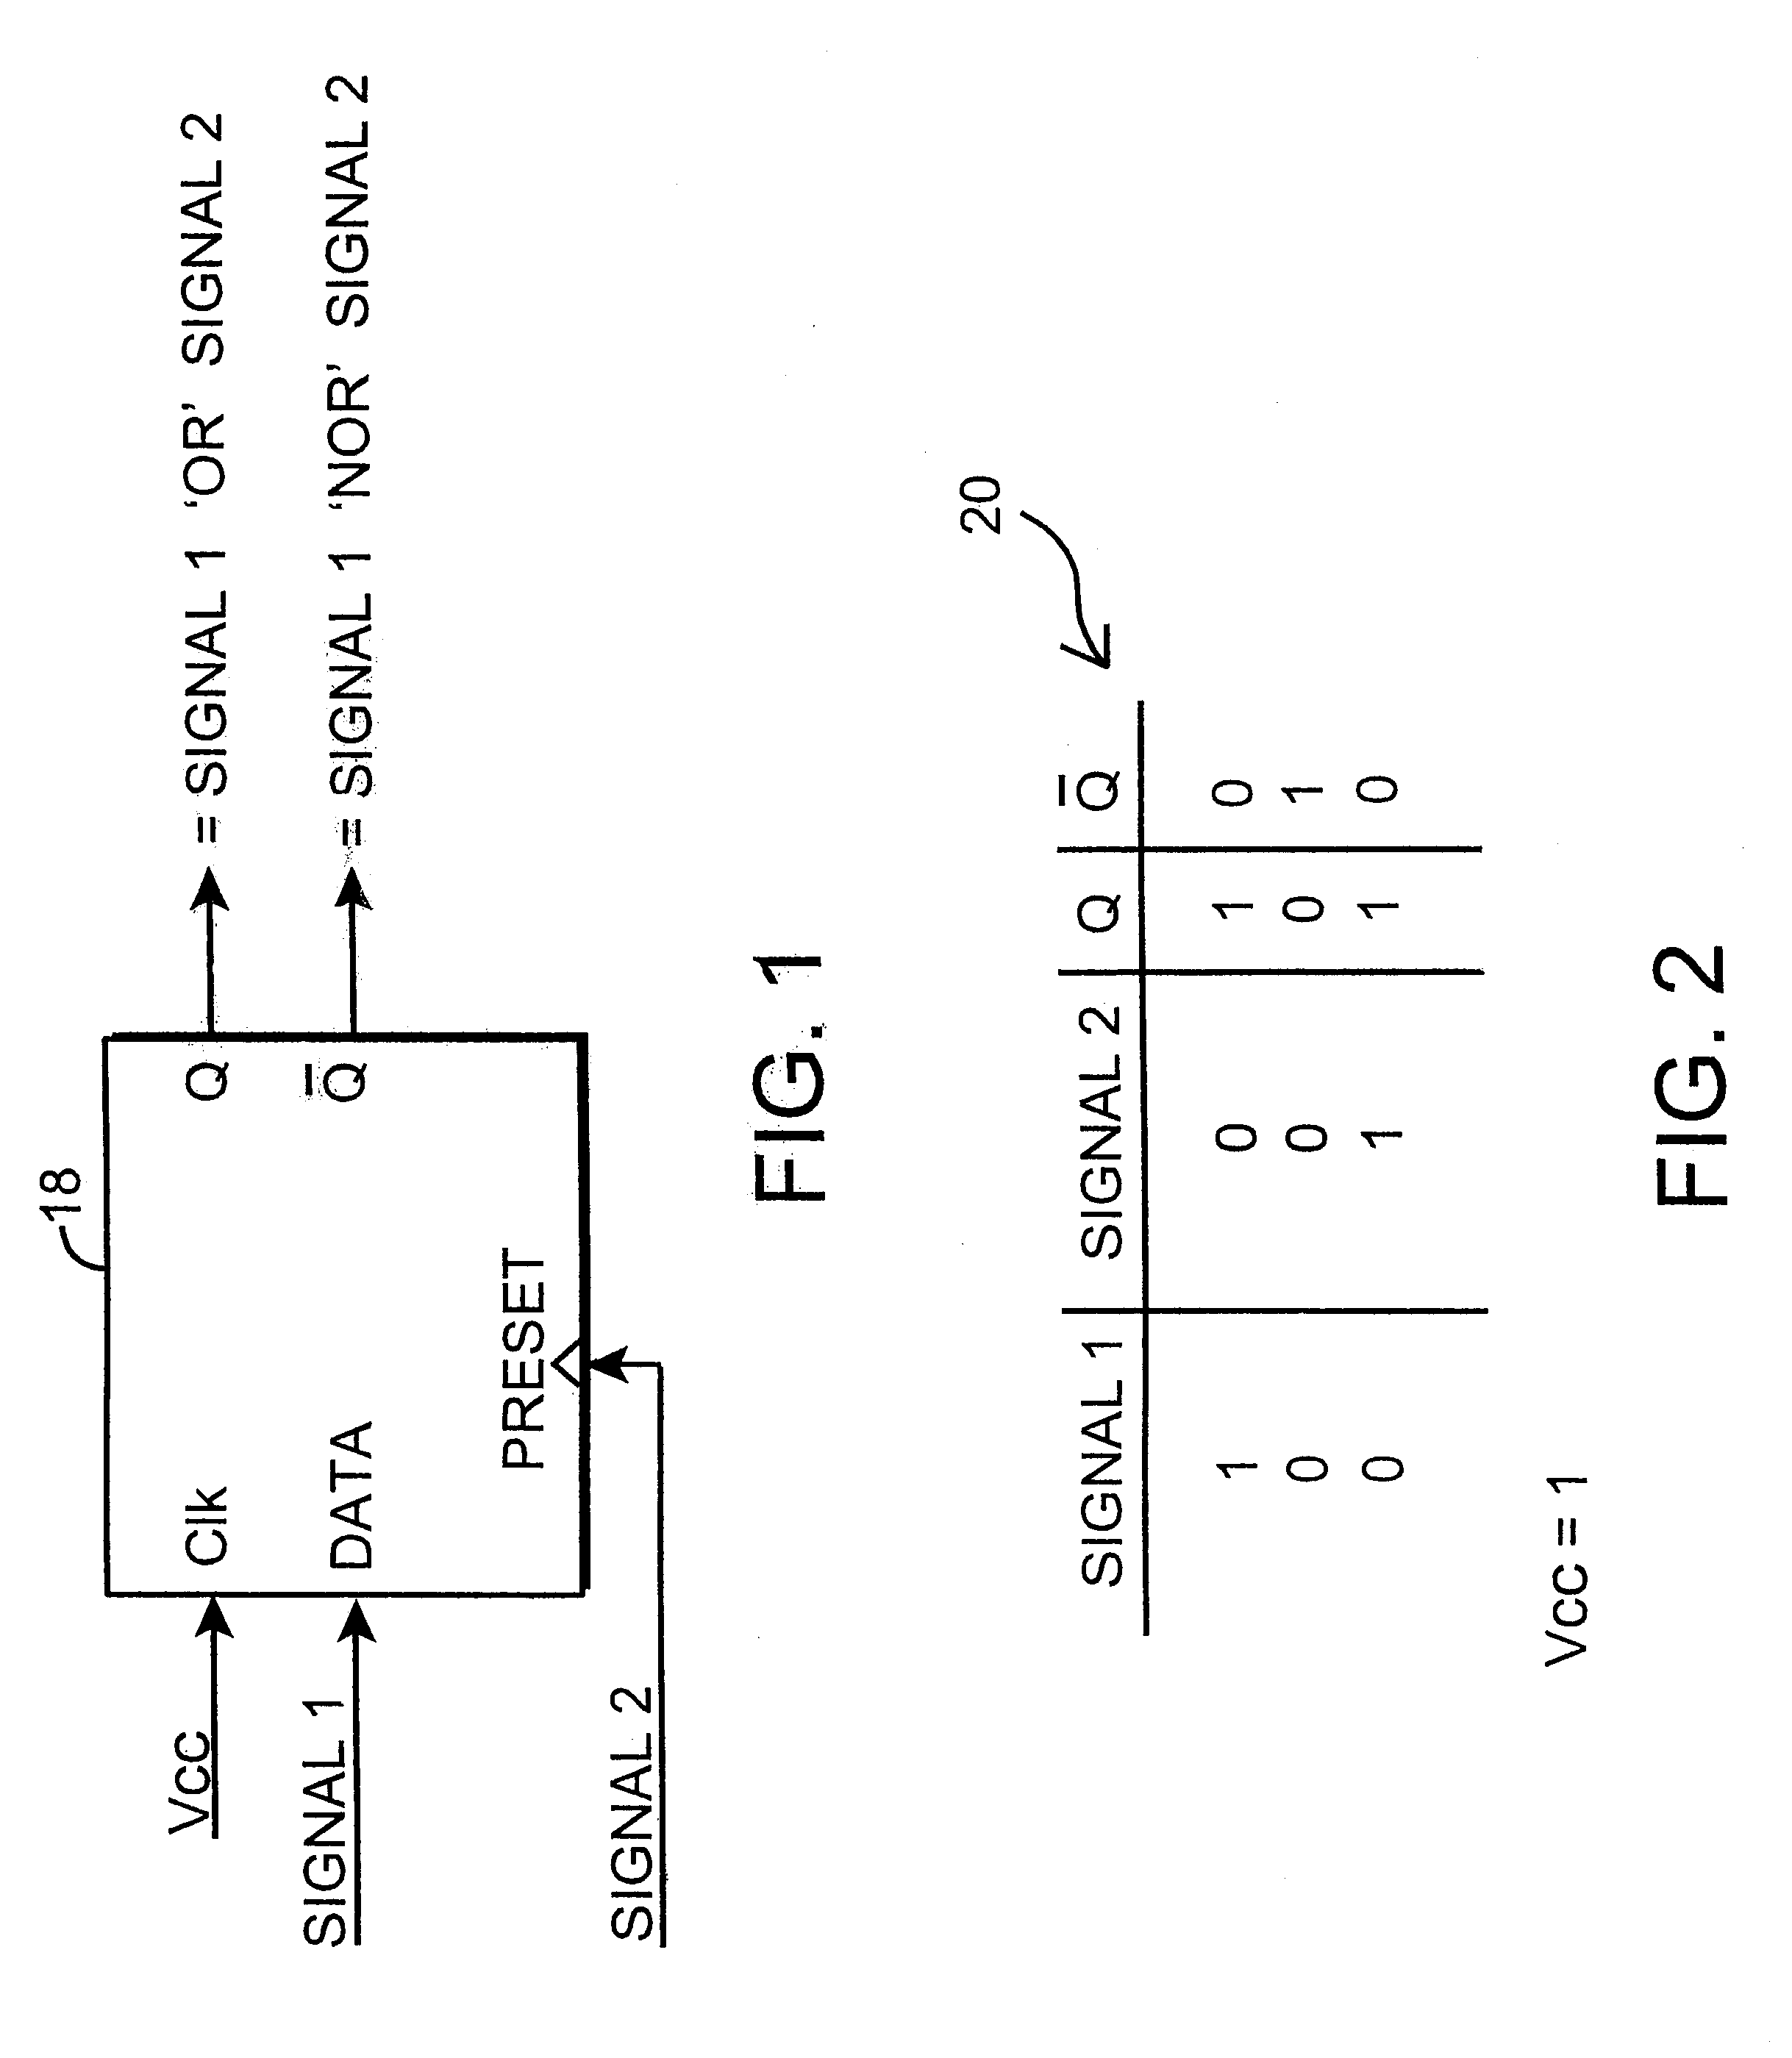 Asynchronous latch design for field programmable gate arrays